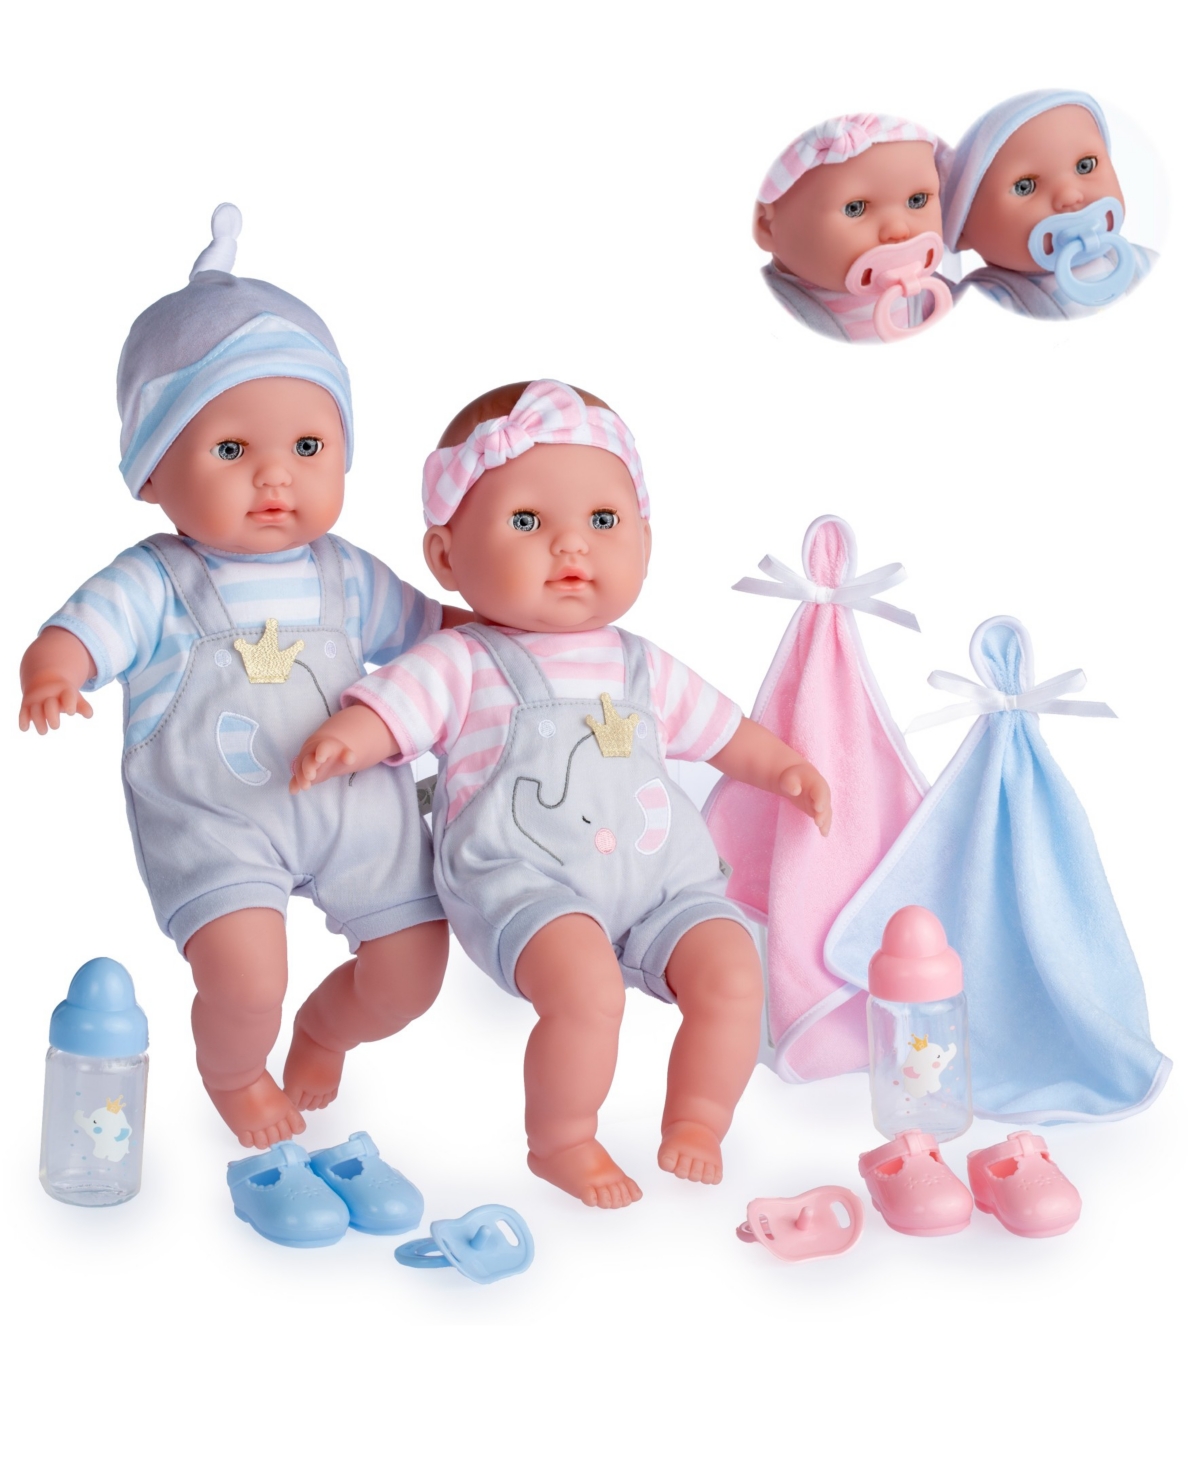 Jc Toys Berenguer Boutique Twins 15" Soft Body Baby Doll In Twin Gift Set